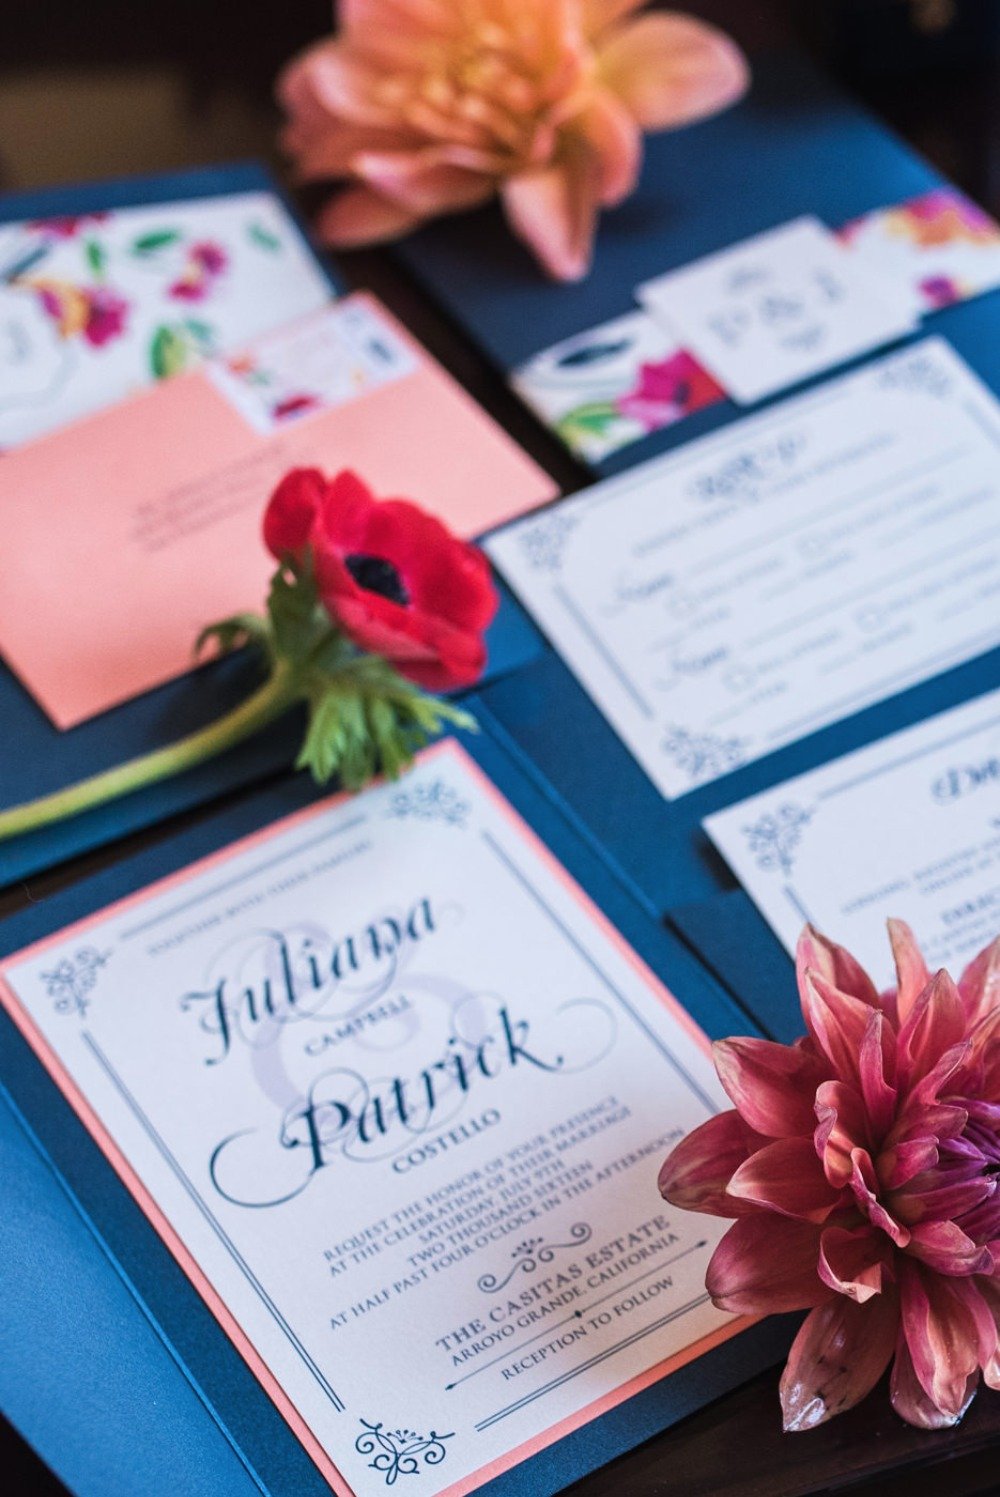 Blue and pink invitation suite